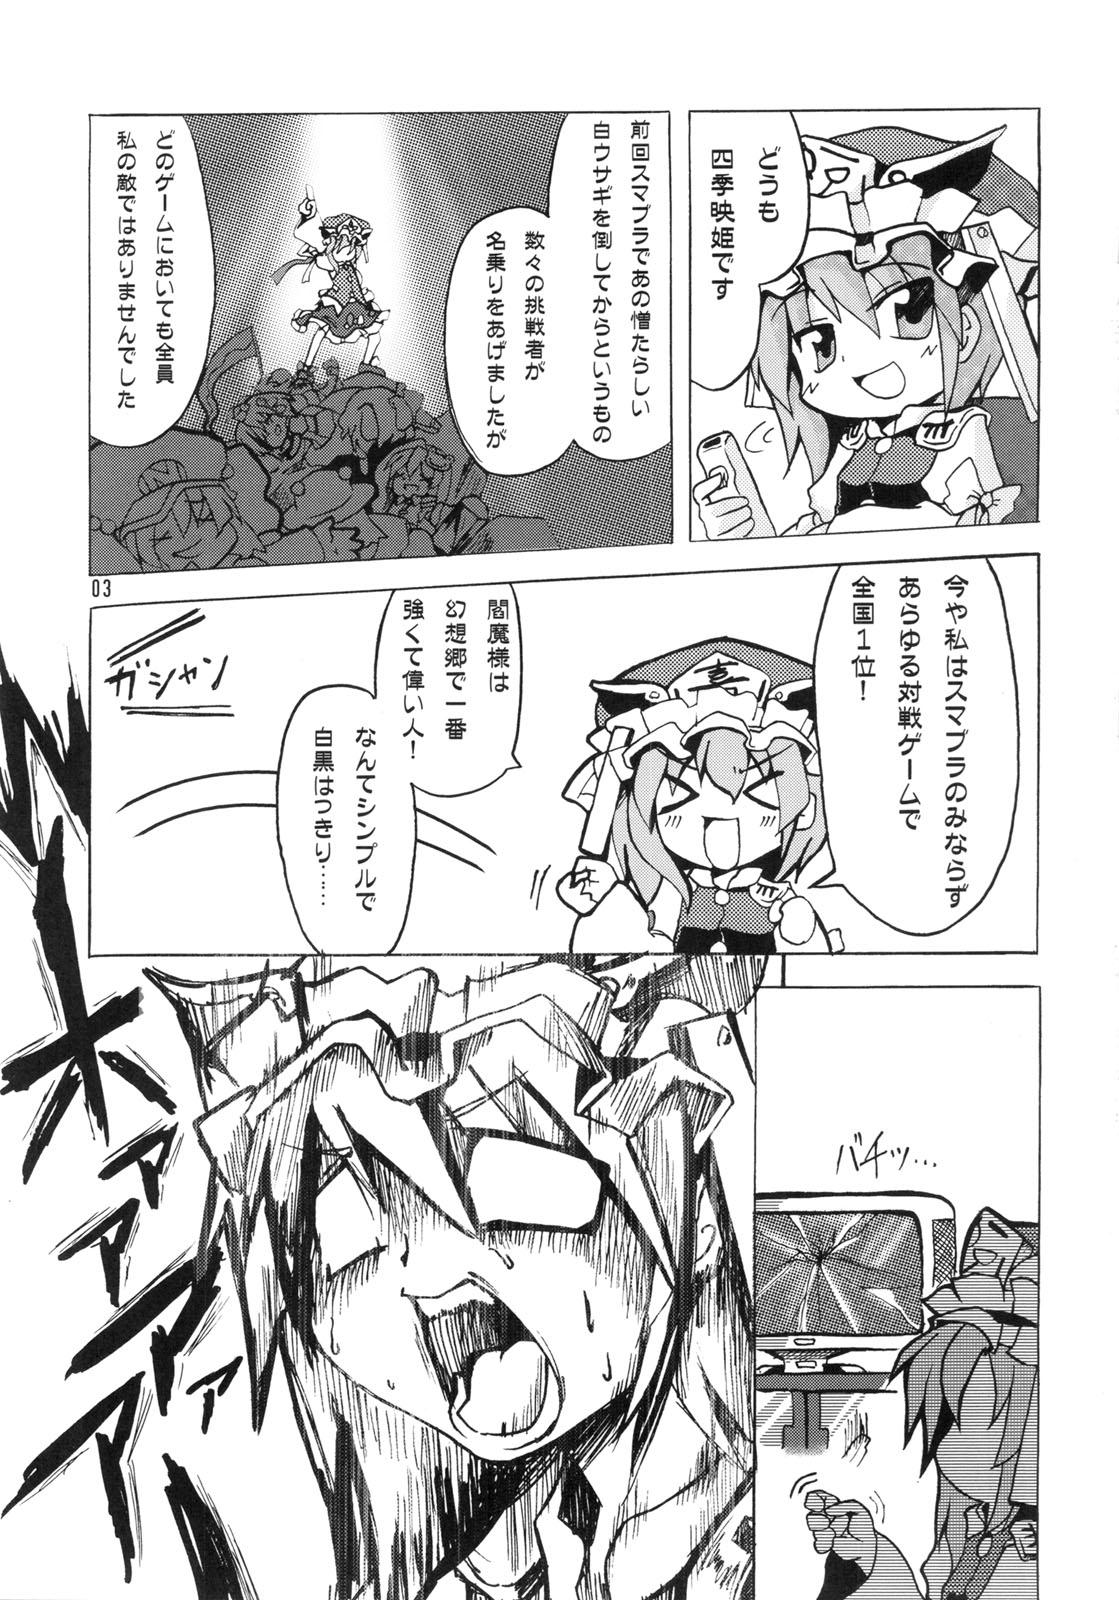 European Porn えーきさまとヴィイ - Touhou project Hot - Page 5